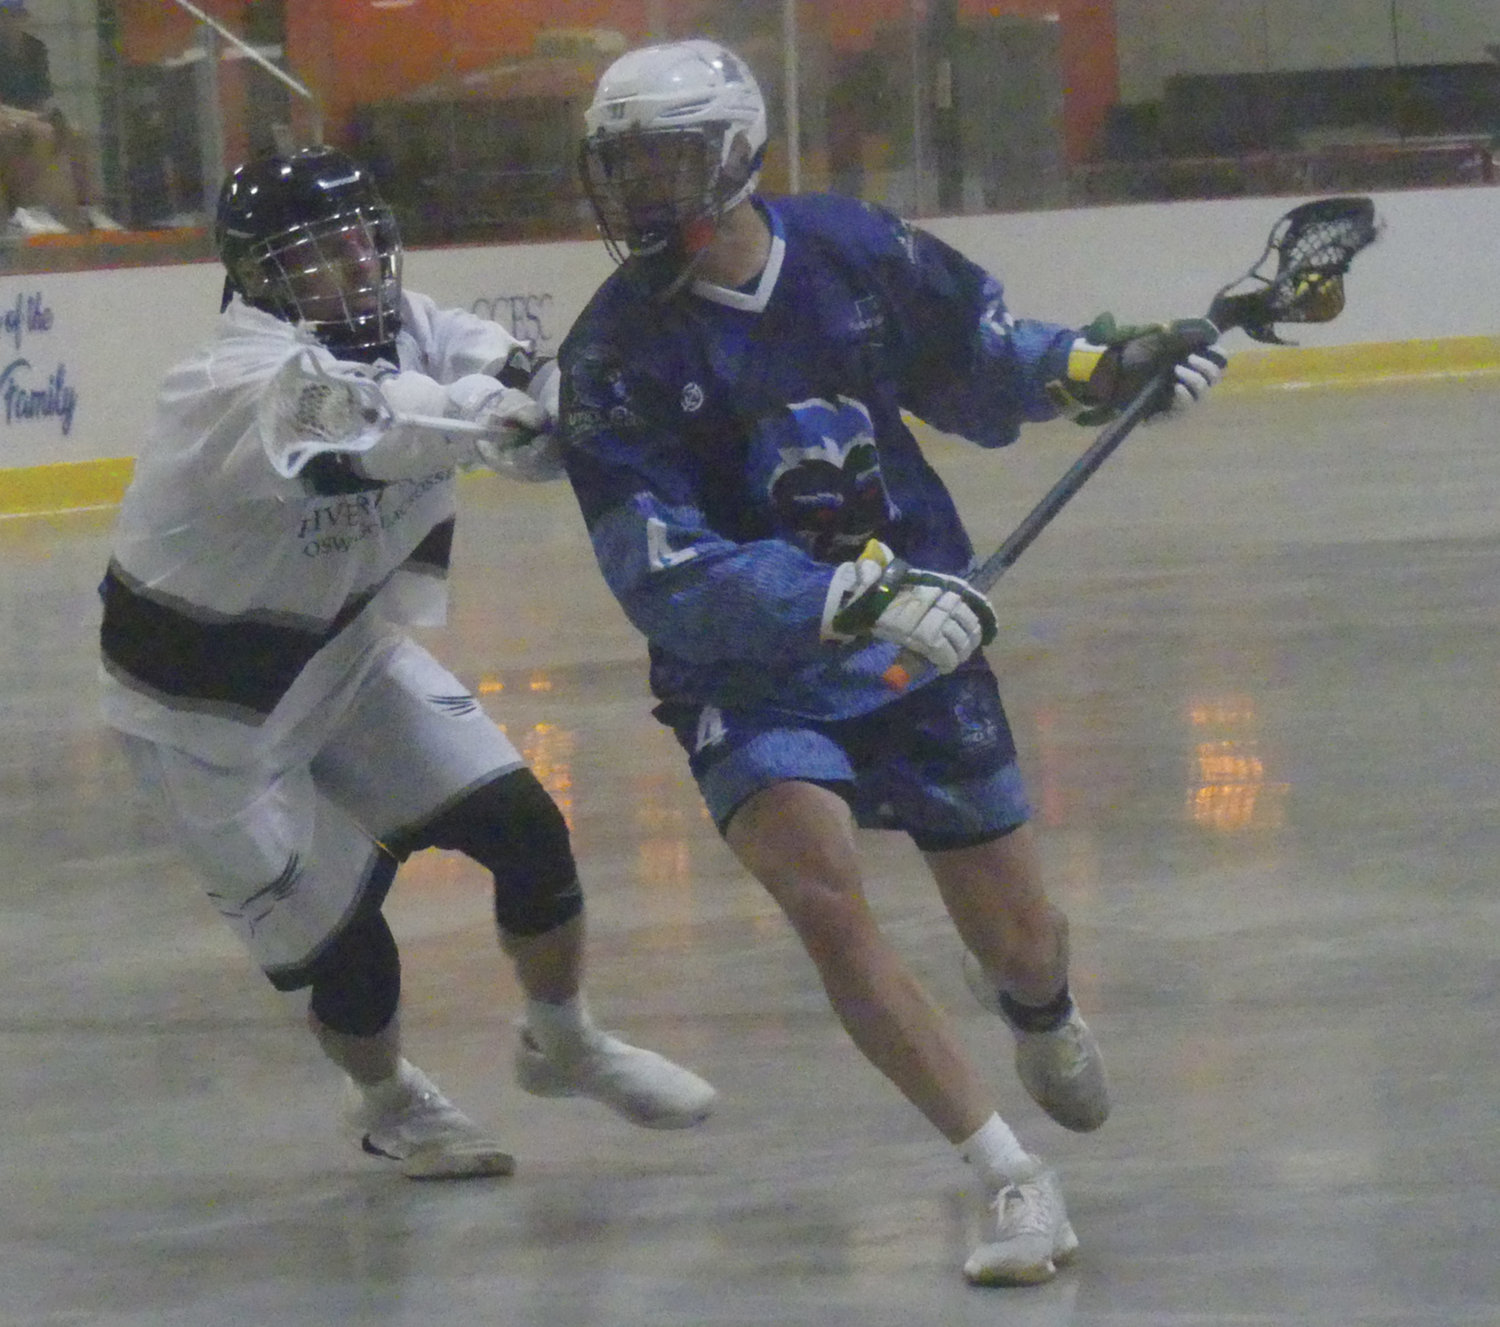 Utica’s Nick Suits finds space against Oswego on Friday night in a box lacrosse game at Kennedy Arena in Rome. Suits, the former New Hartford standout, had three goals and an assist in Utica’s lopsided victory.